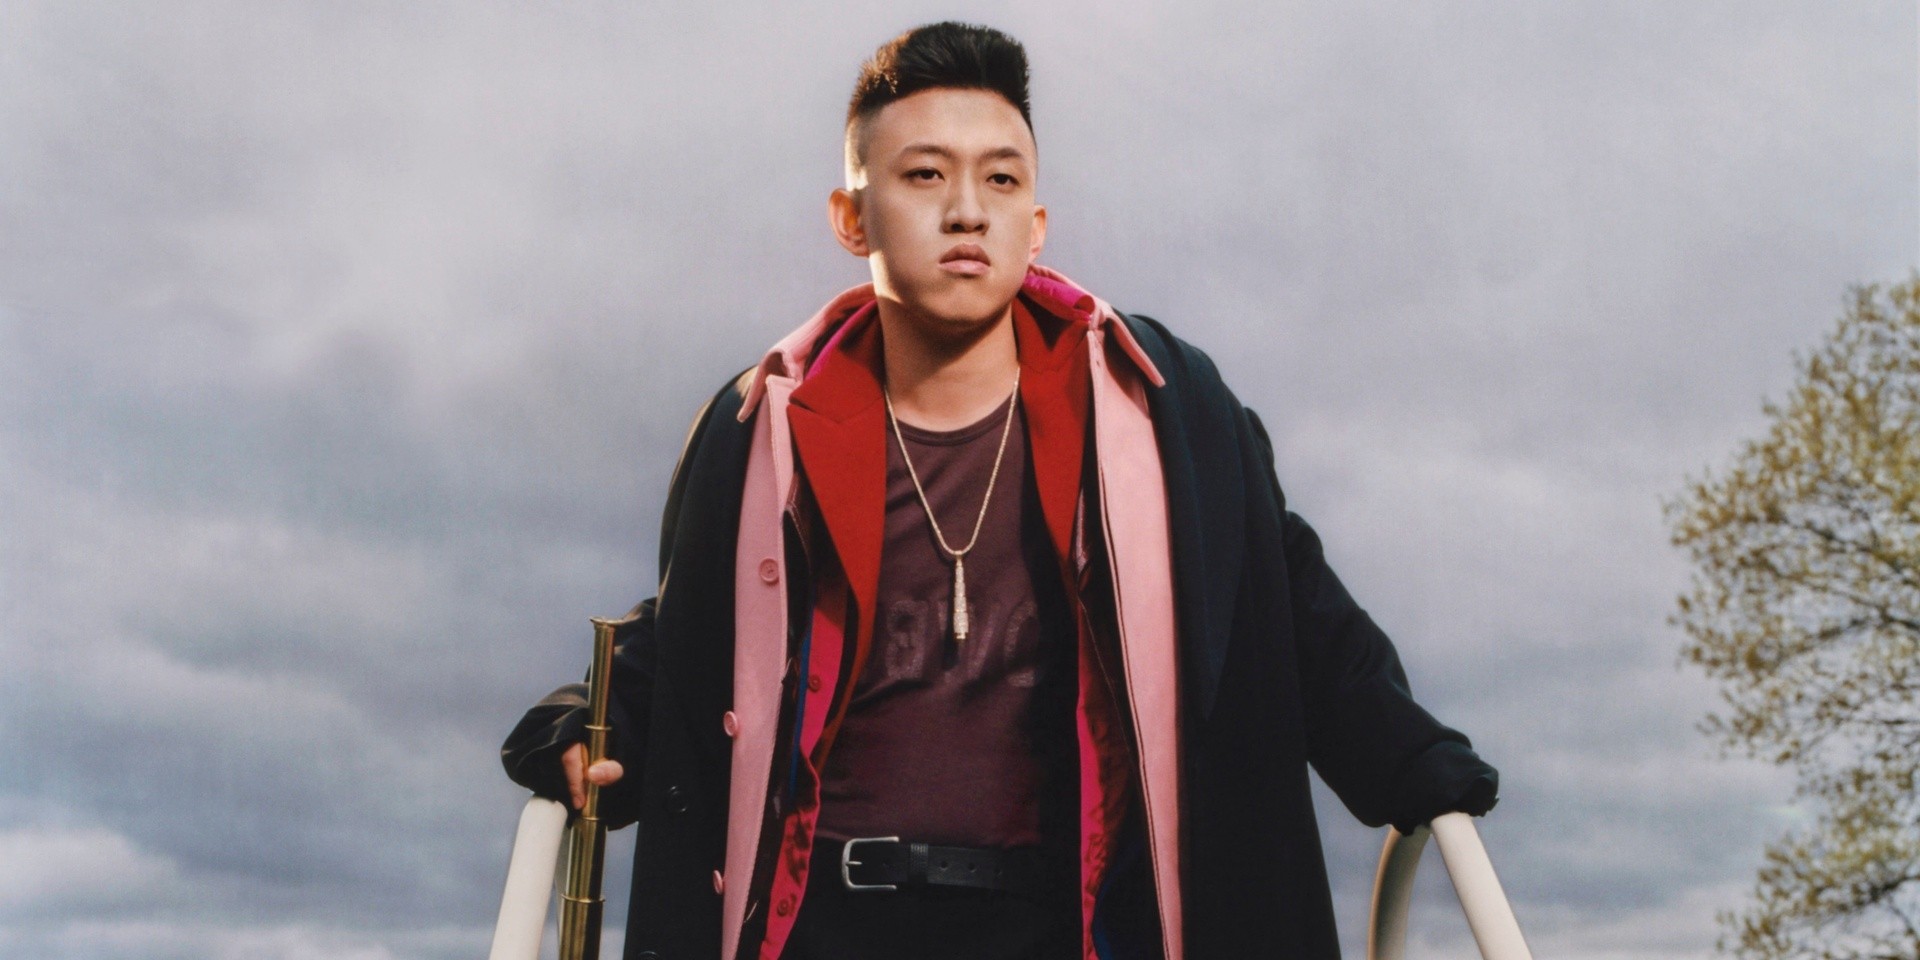 "I just feel that we shouldn't do anything for the sake of it": An interview with Rich Brian
